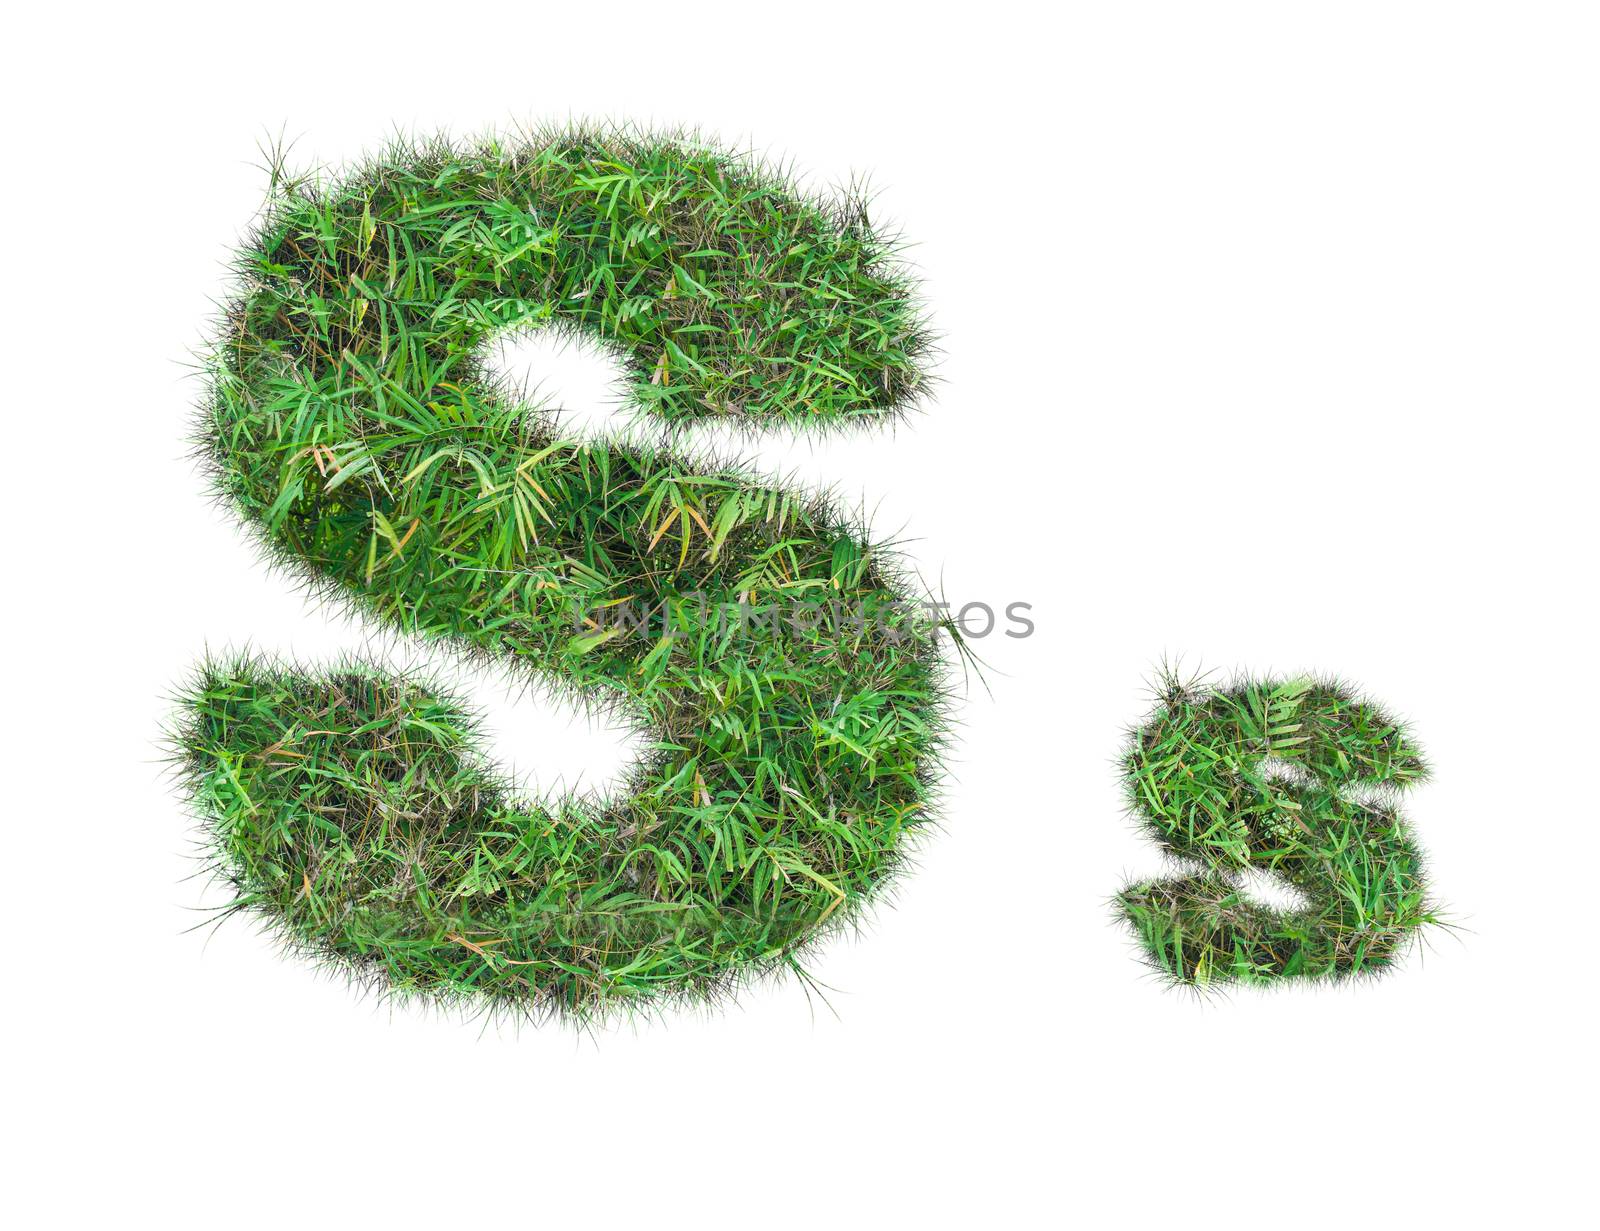 letter S on green grass isolated on over white background